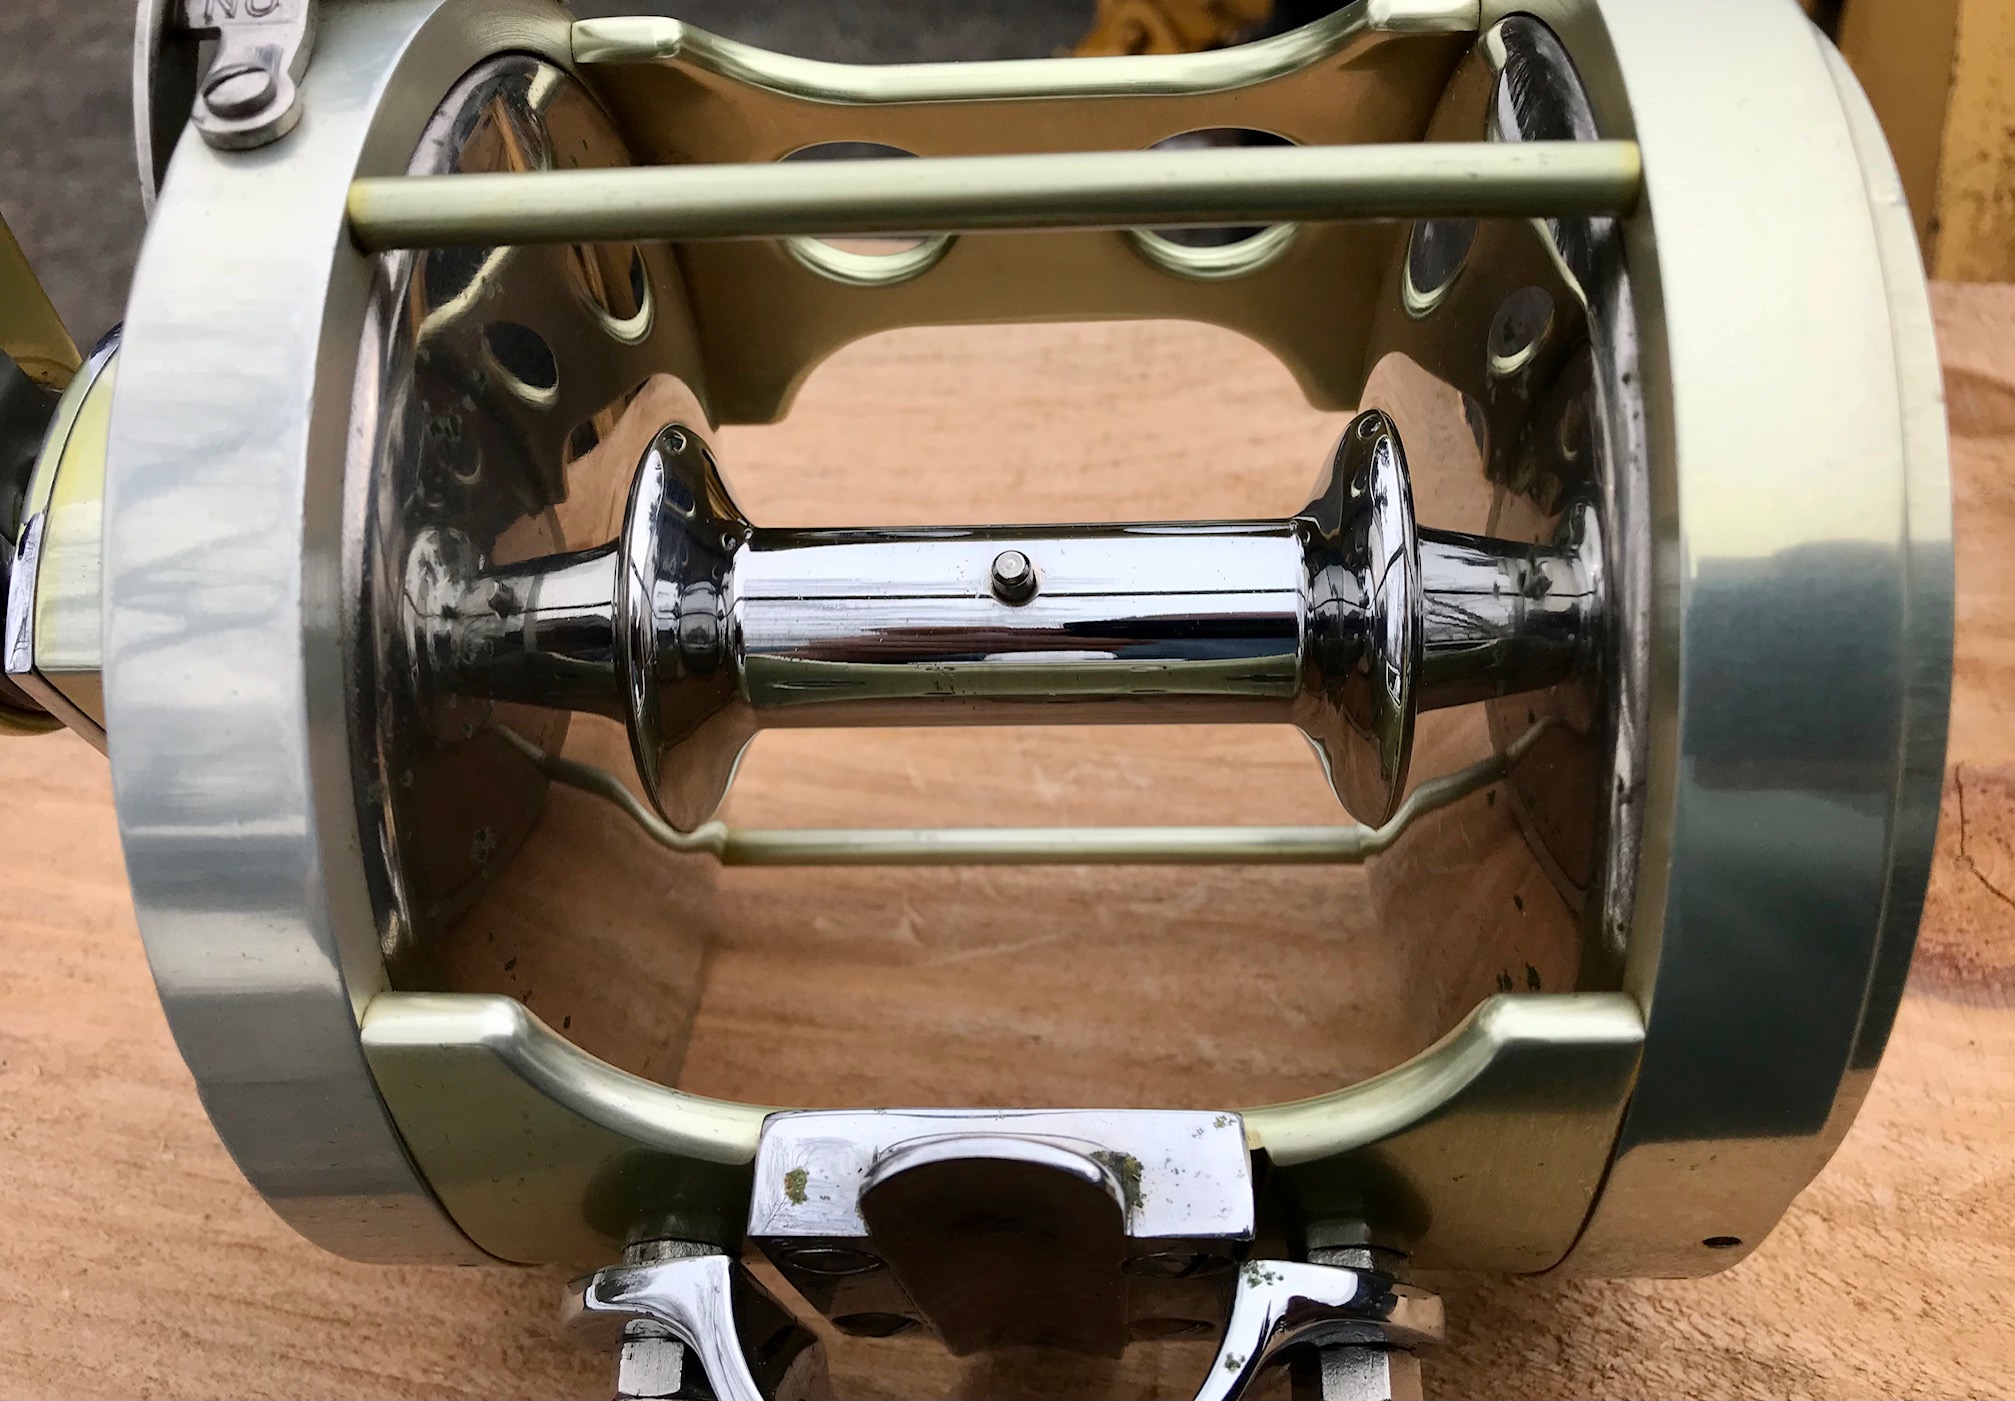 Fin-Nor 12/0s from the 1950s - Reel Talk - ORCA